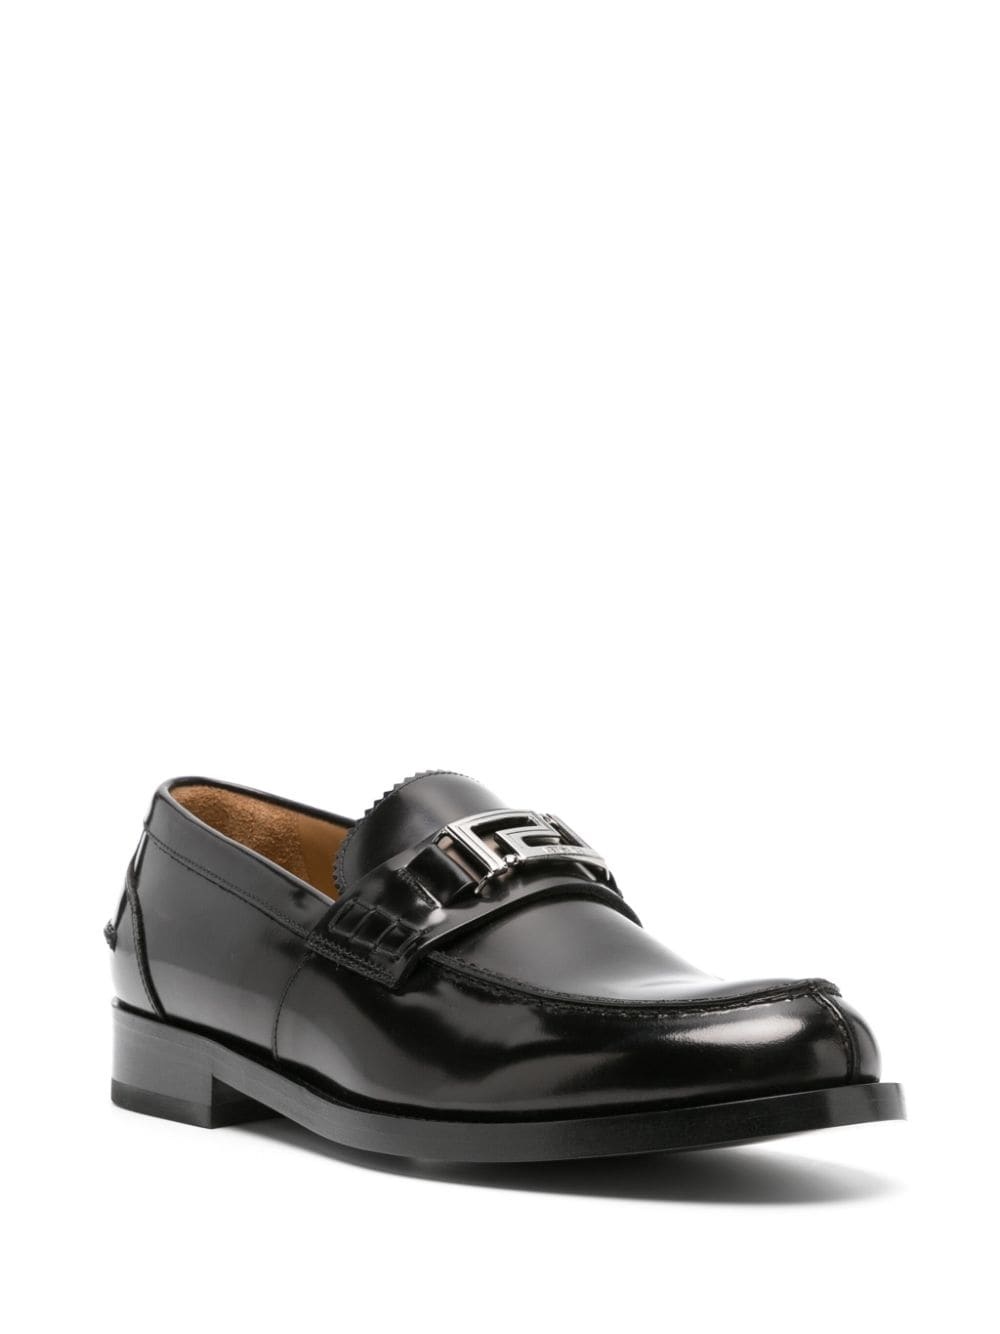 Greca patent leather loafers - 2